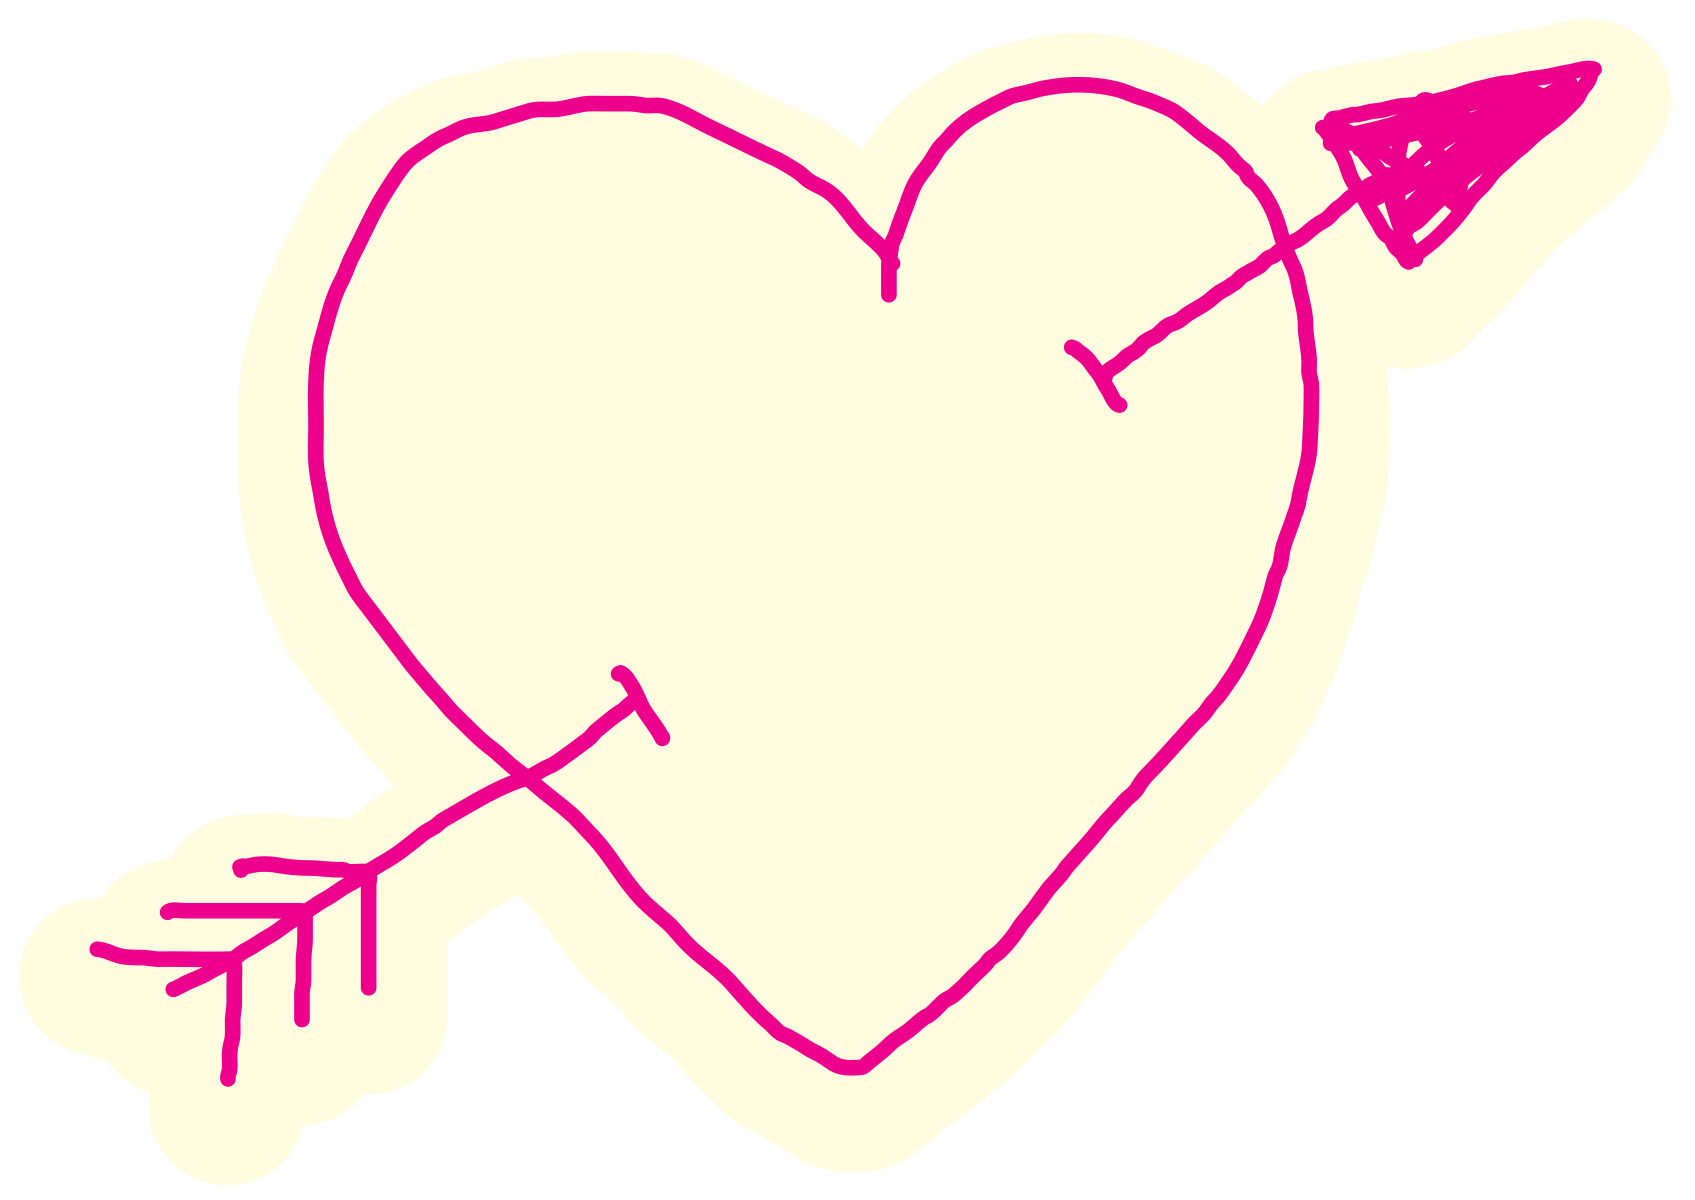 Heart Arrow Valentine HD Image Free PNG Image